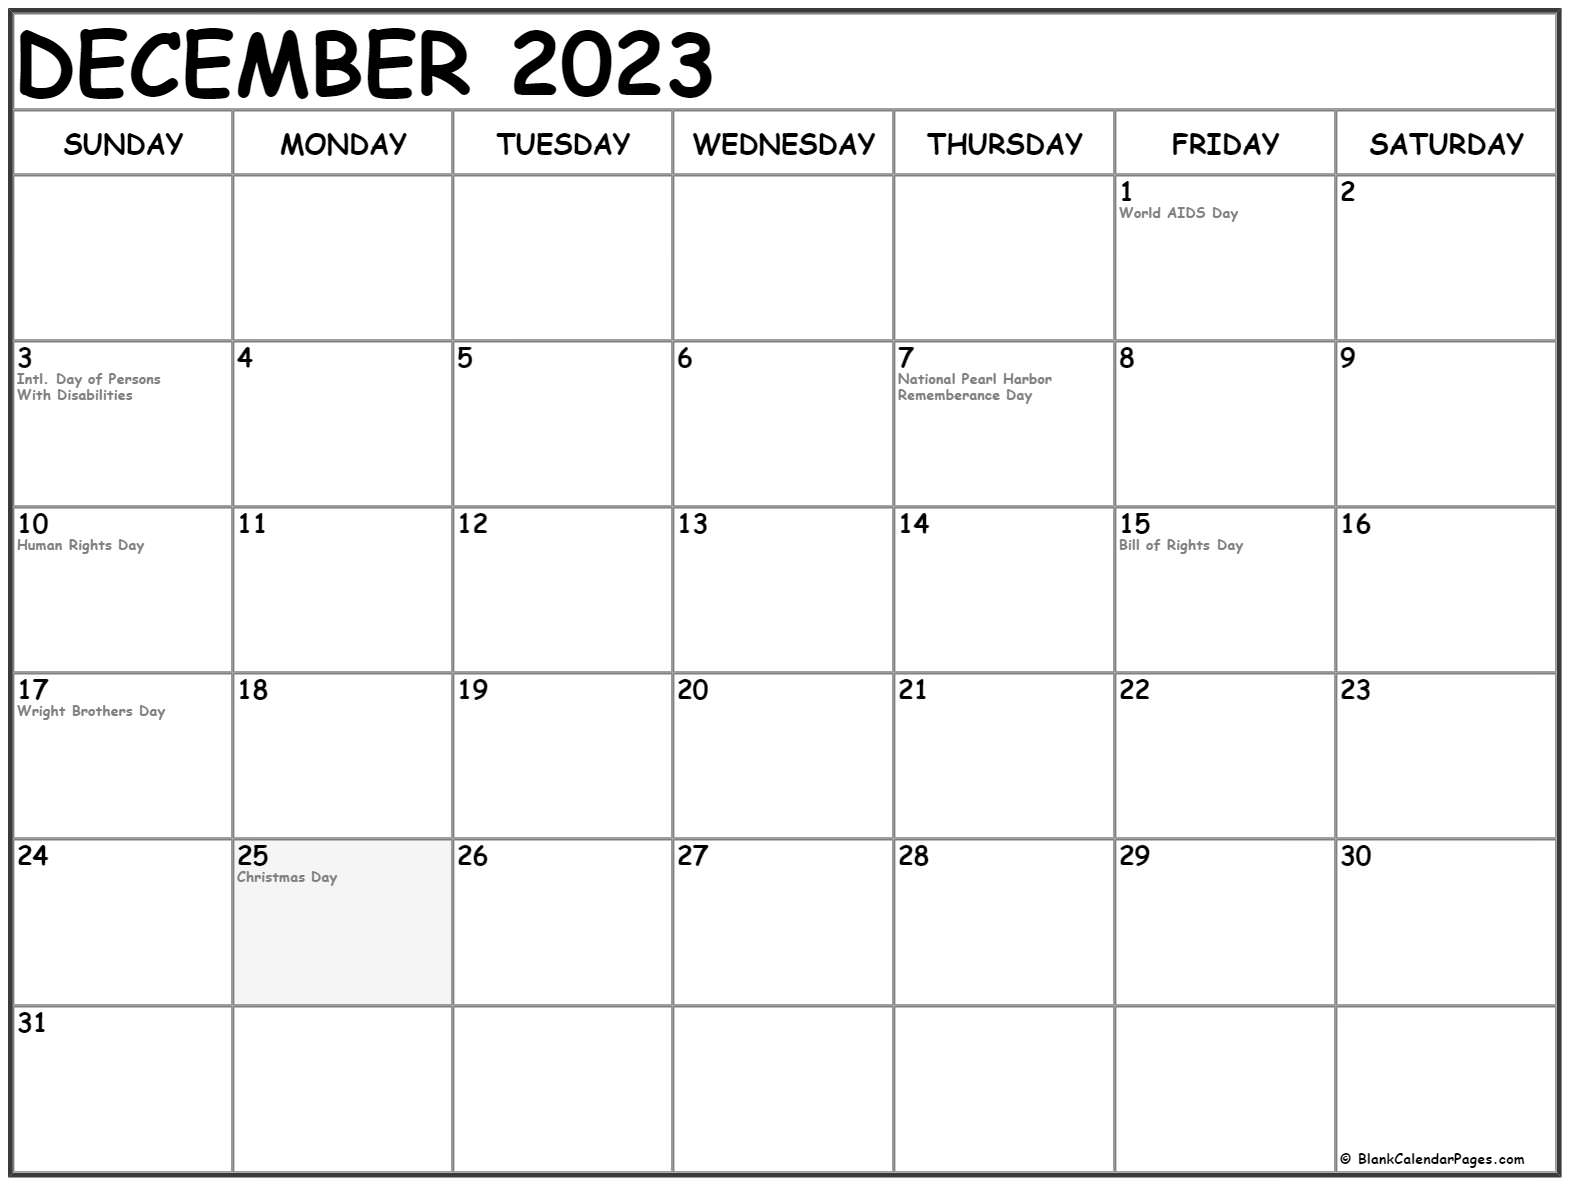 christmas-day-2023-calendar-date-2023-cool-perfect-most-popular-review-of-best-christmas